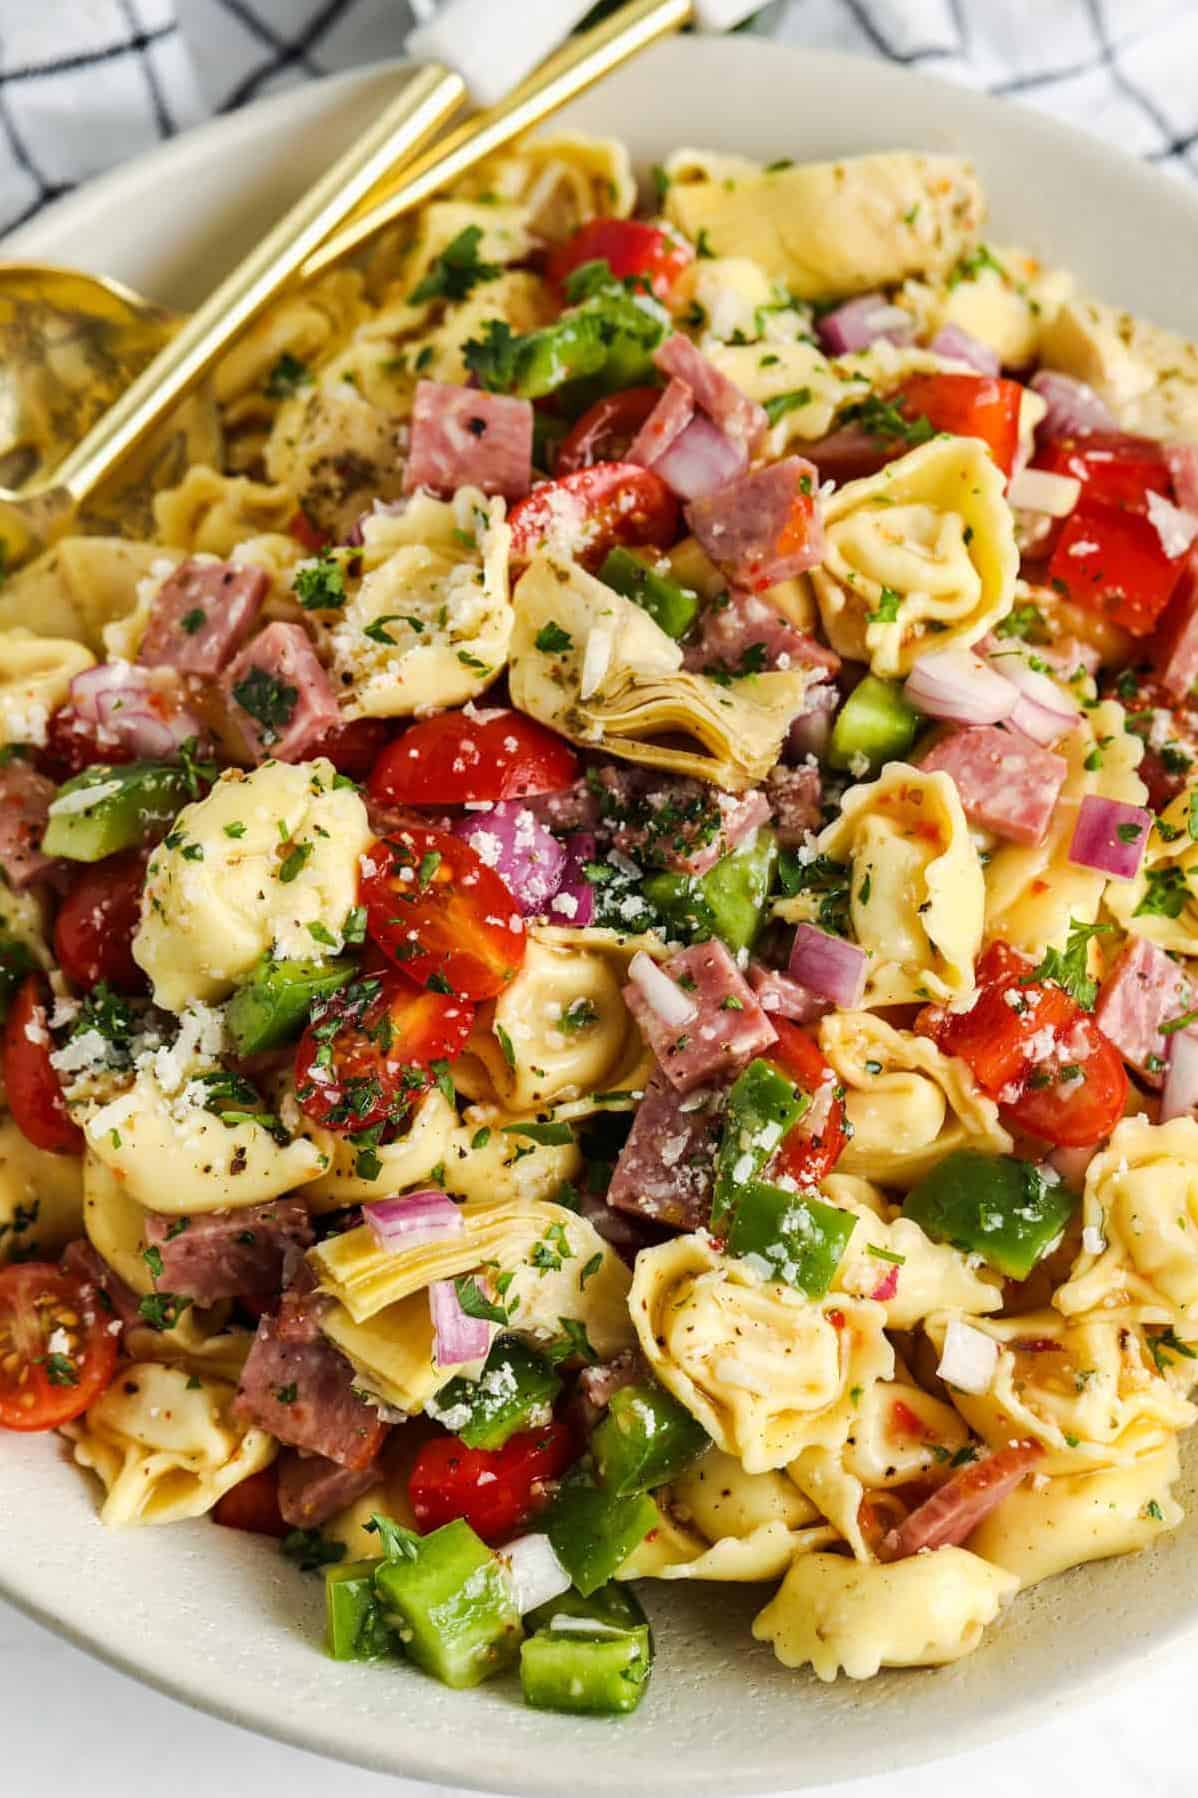  Fresh and delicious tortellini salad perfect for any summer party!